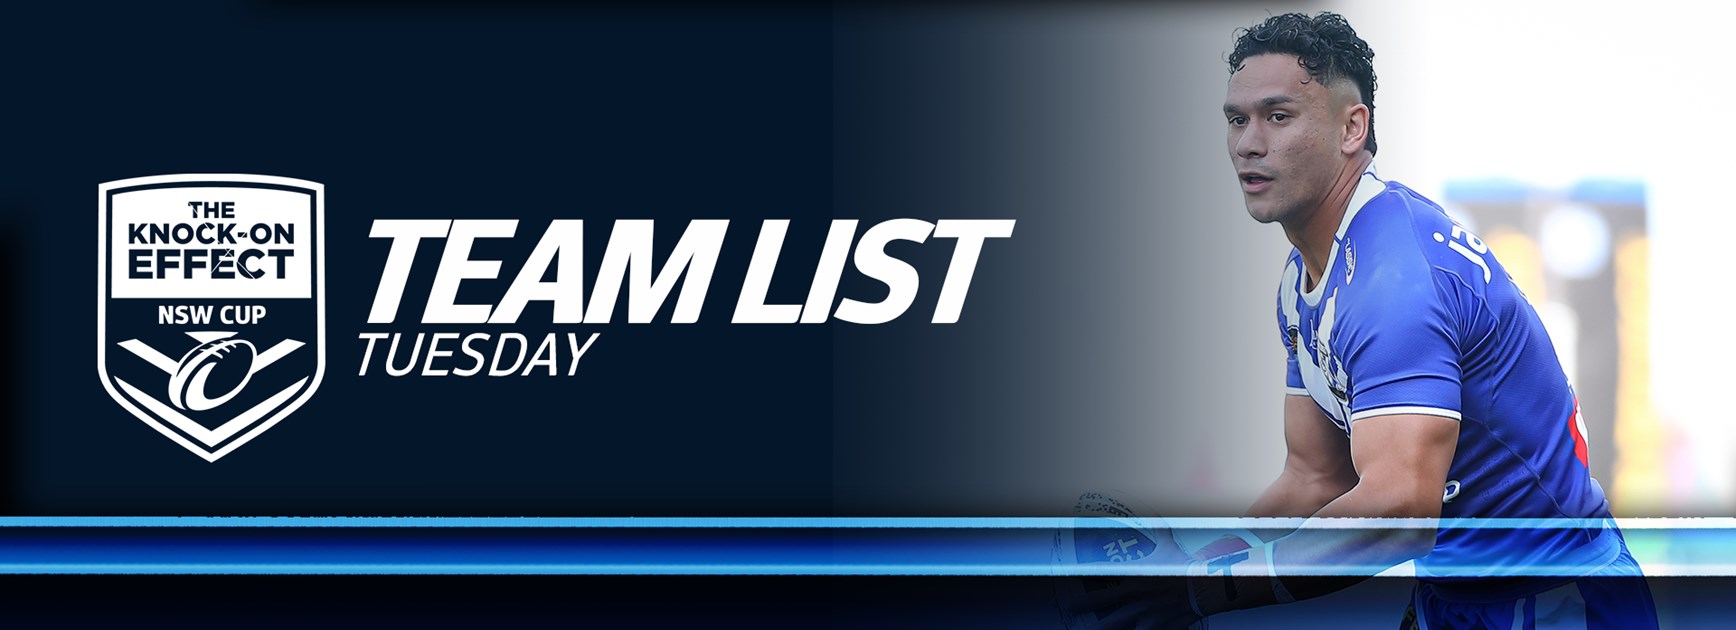 Team List Tuesday | The Knock-On Effect NSW Cup - Round 15